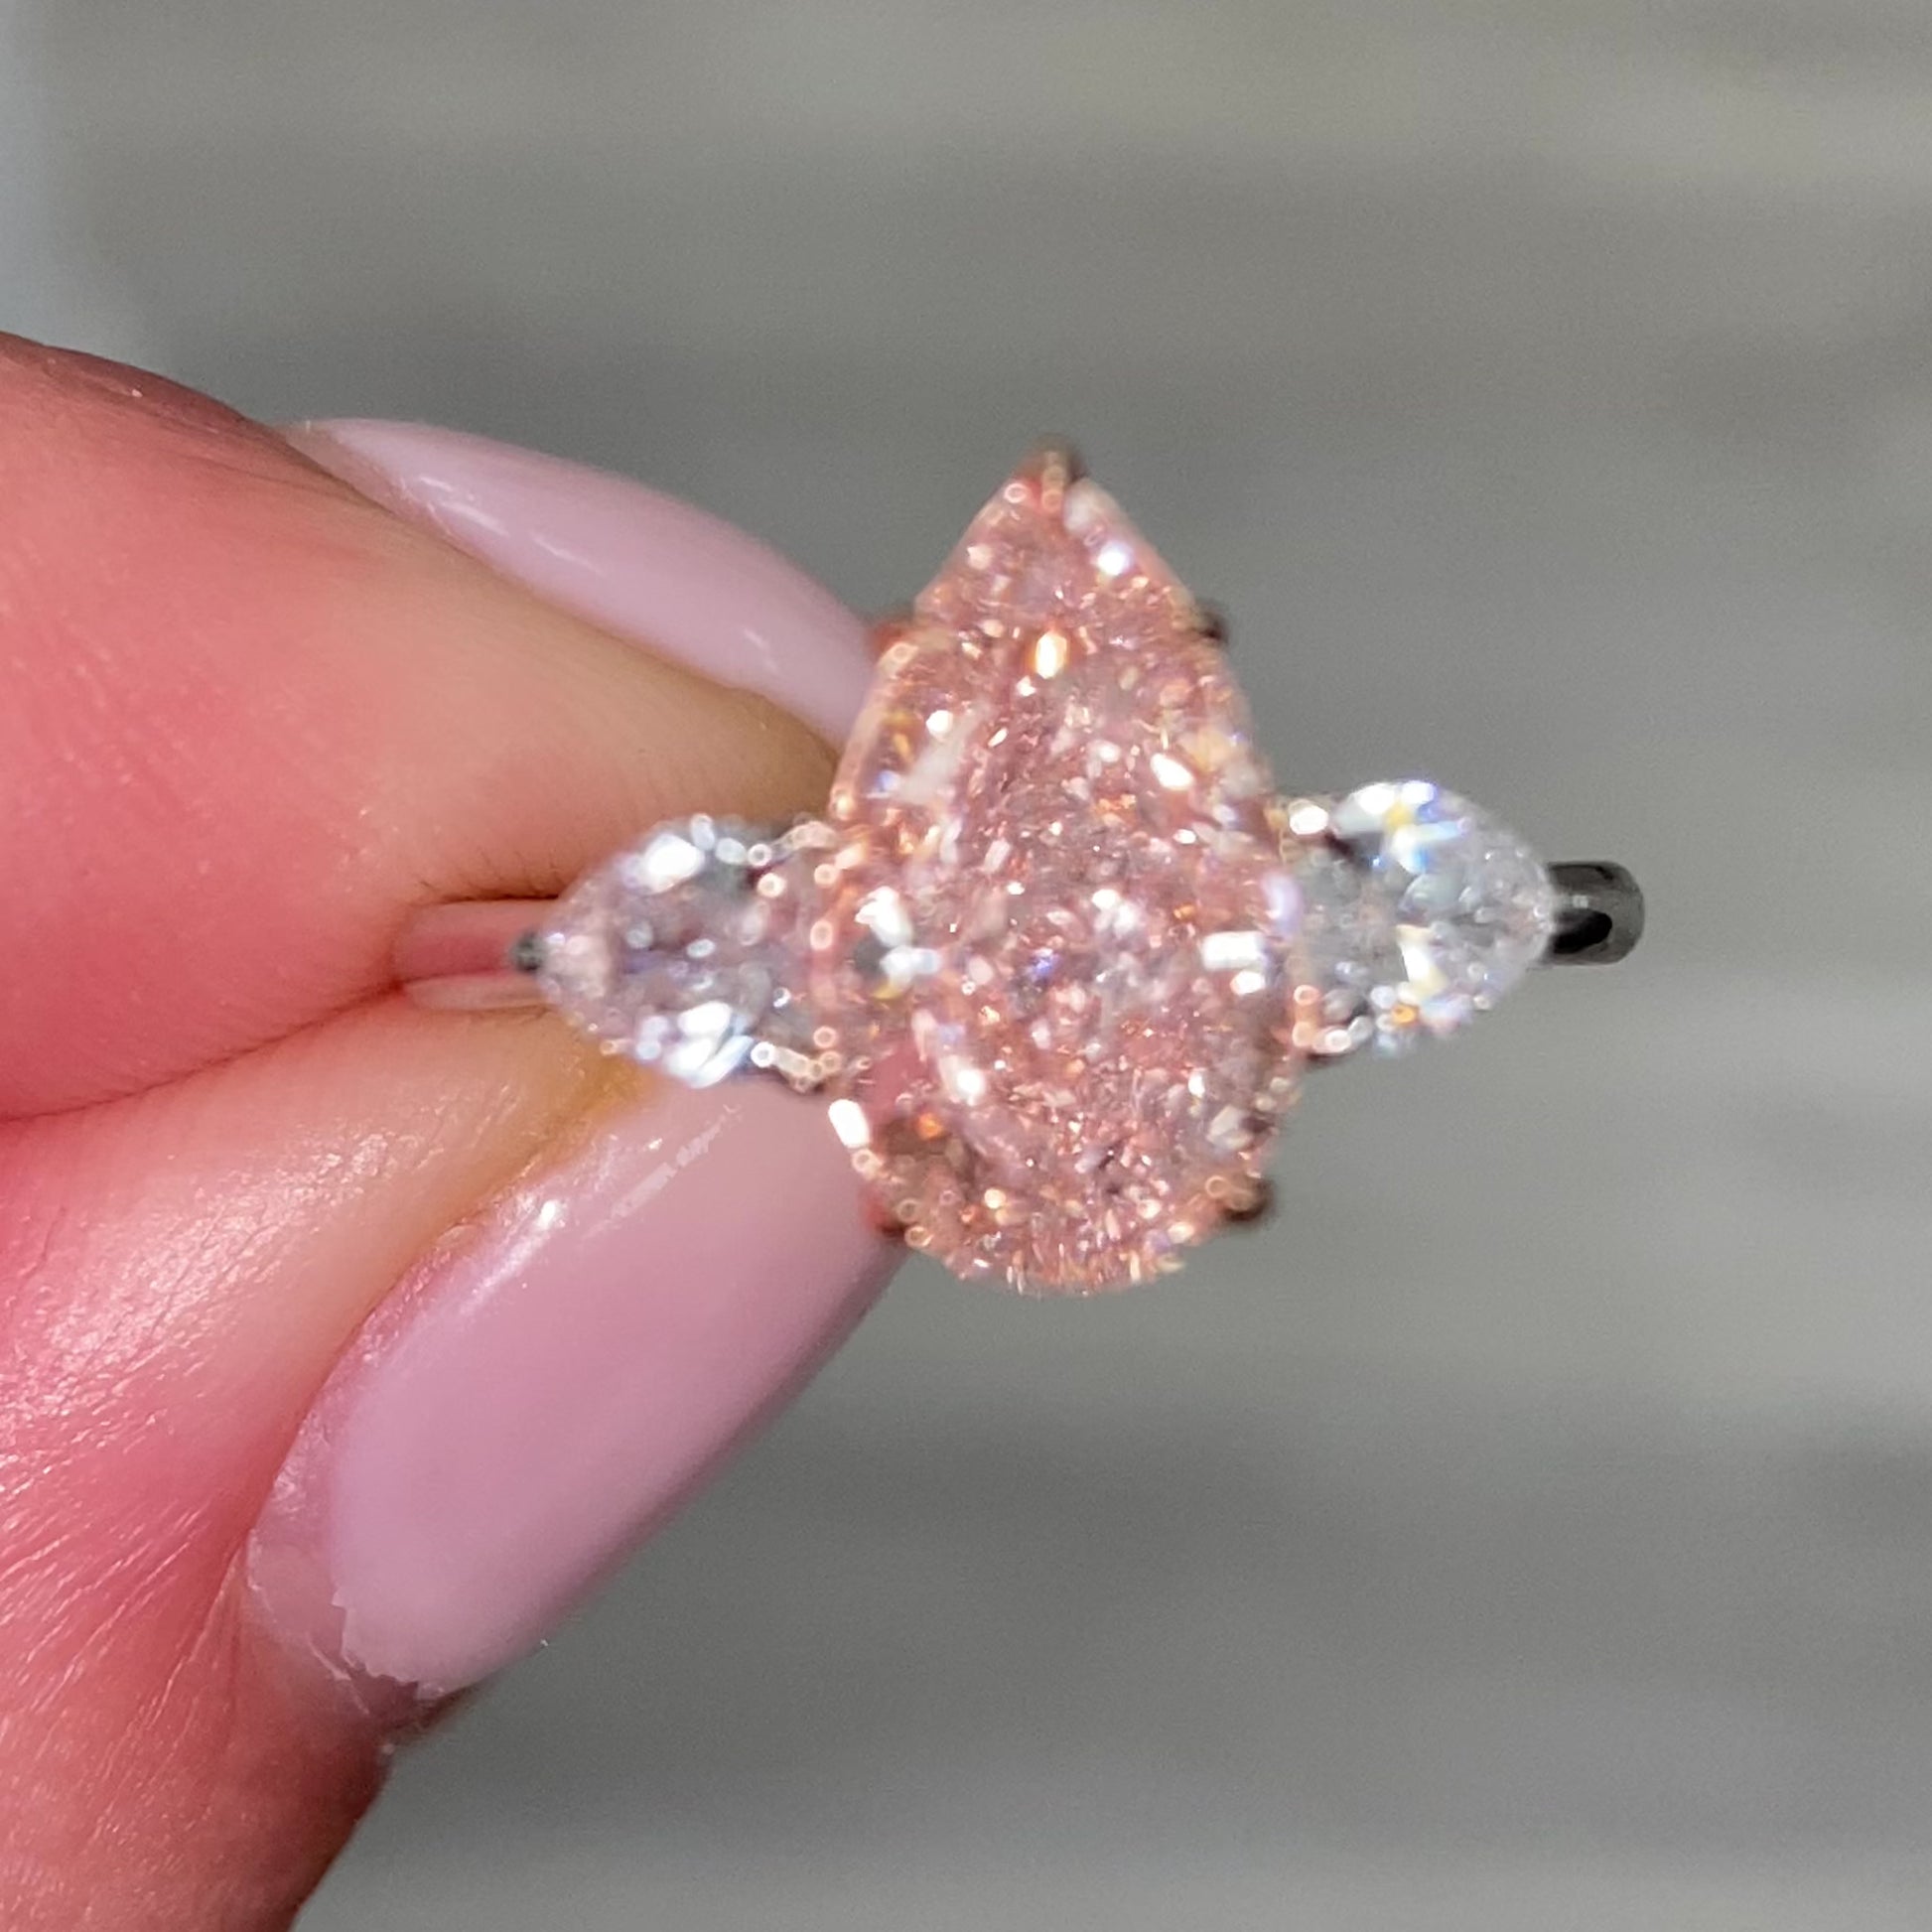 2.79 Total Carat Weight 2.18 Carat Center Pear Shape Diamond GIA Certified Fancy Light Brownish Pink VS1 clarity 0.61 W Pear Shape Side Diamonds Excellent, Very Good, No Fluorescence Handcrafted in NYC